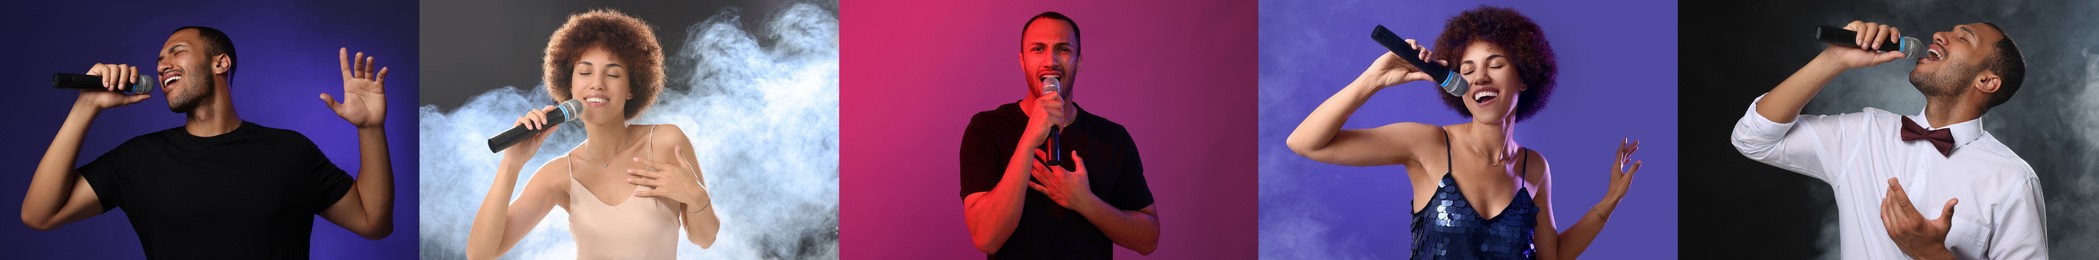 Image of Singers on different color backgrounds, collection of photos